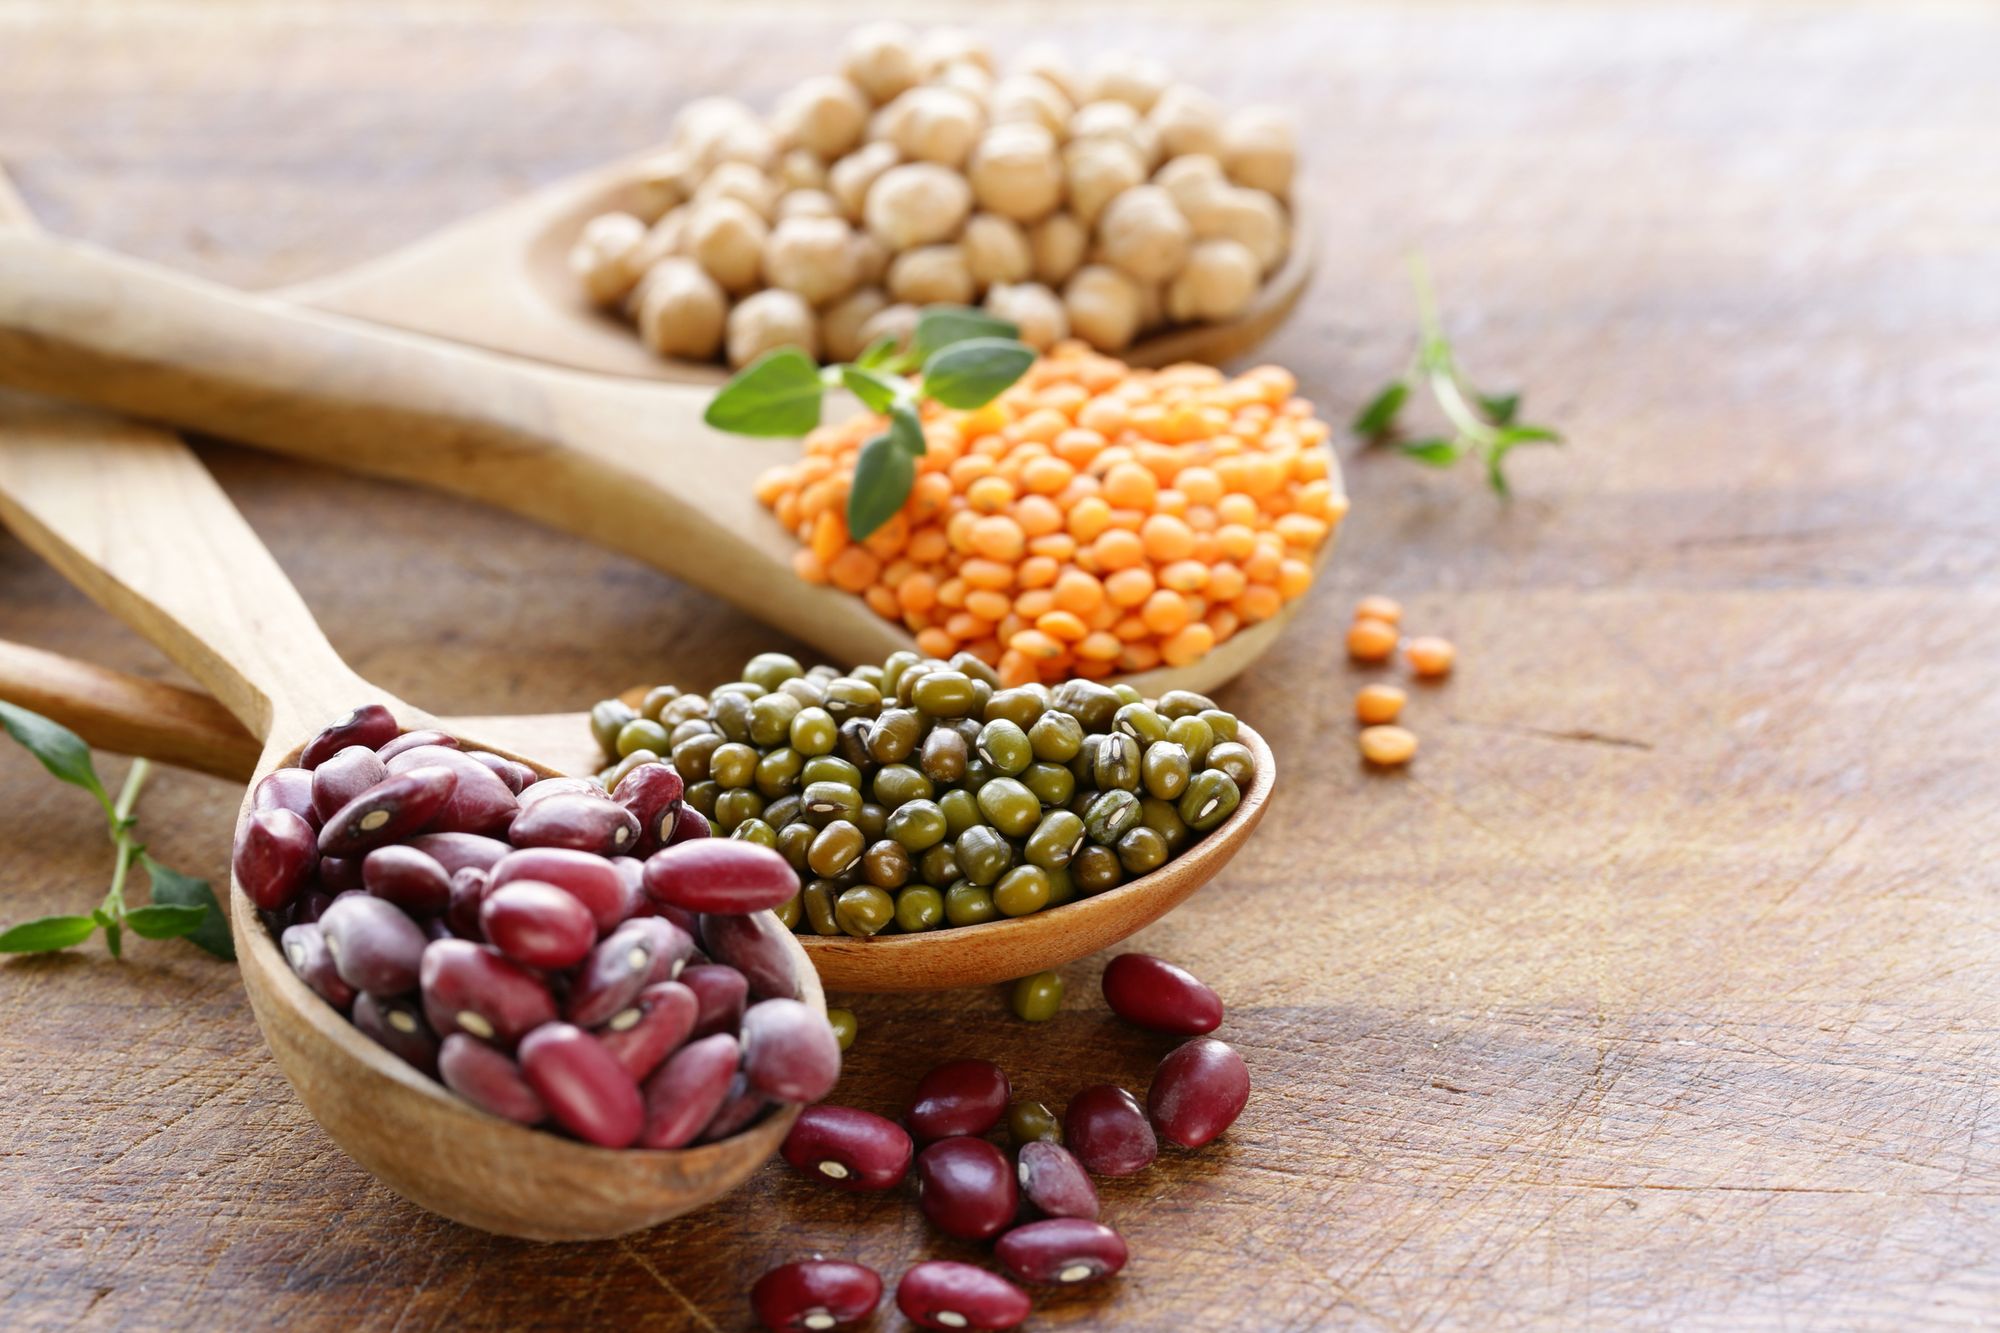 Is a lectin-free diet beneficial?